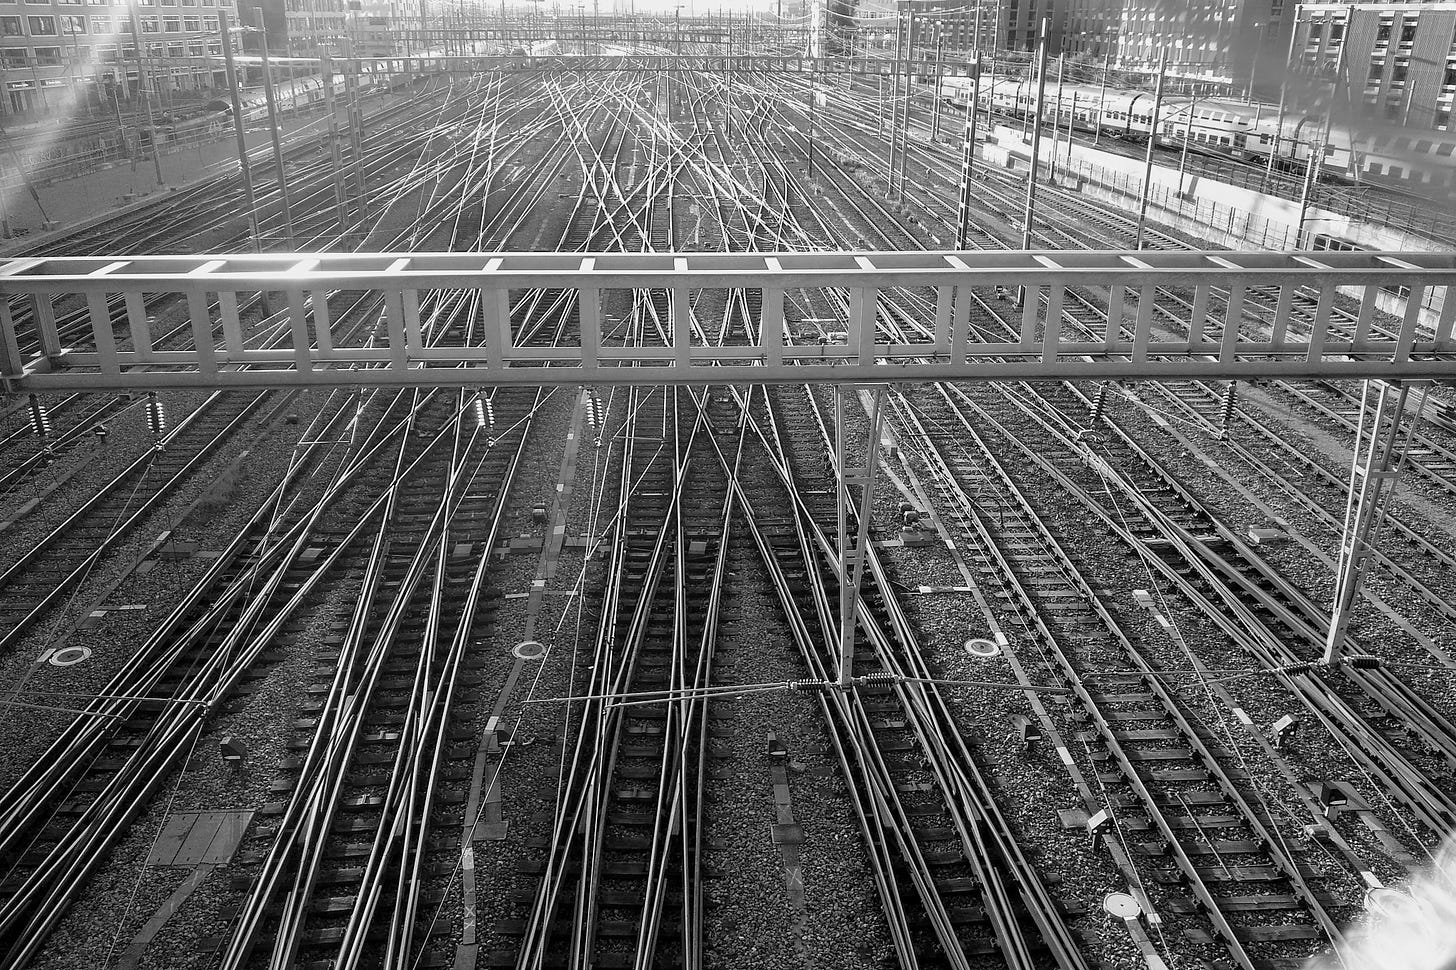 A black and white photo taken from a footbridge overlooking multiple interleaving electrified train tracks.